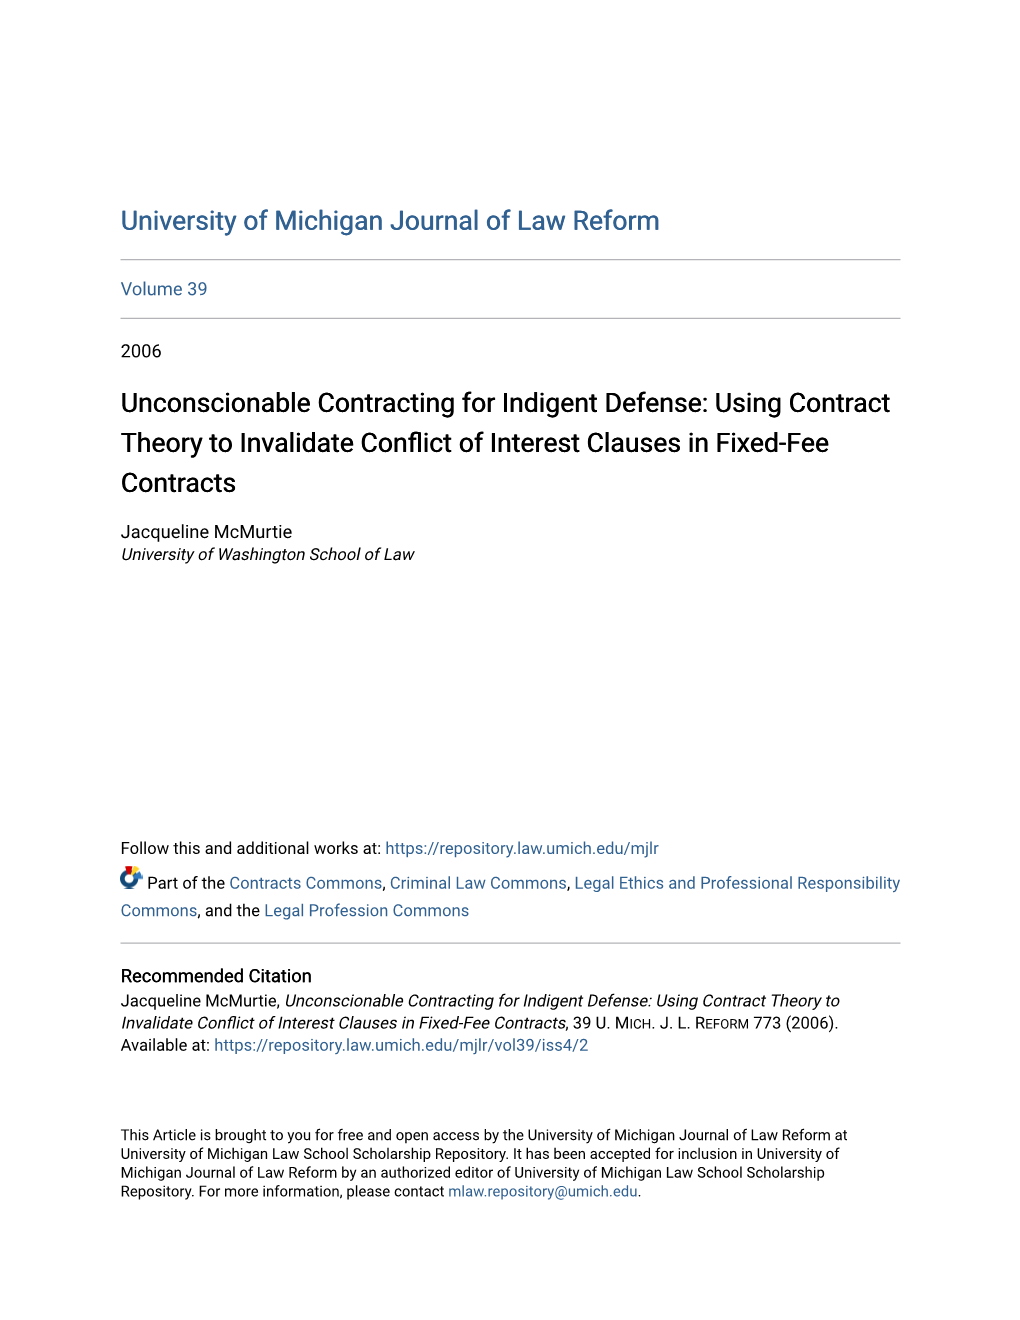 Unconscionable Contracting for Indigent Defense: Using Contract Theory to Invalidate Conflict of Interest Clauses in Fixed-Fee Contracts